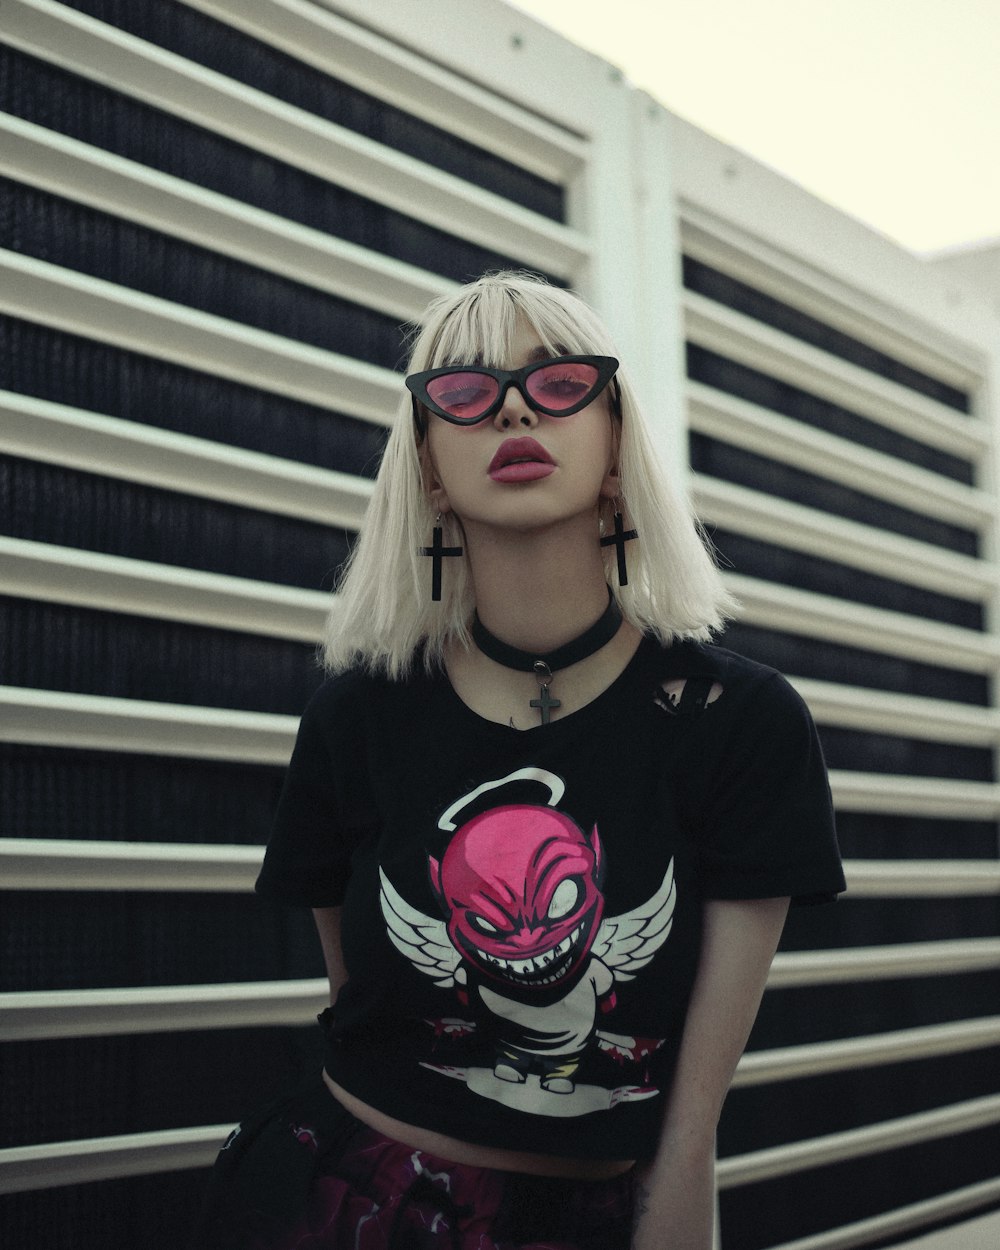 a woman with white hair wearing a black shirt and pink glasses